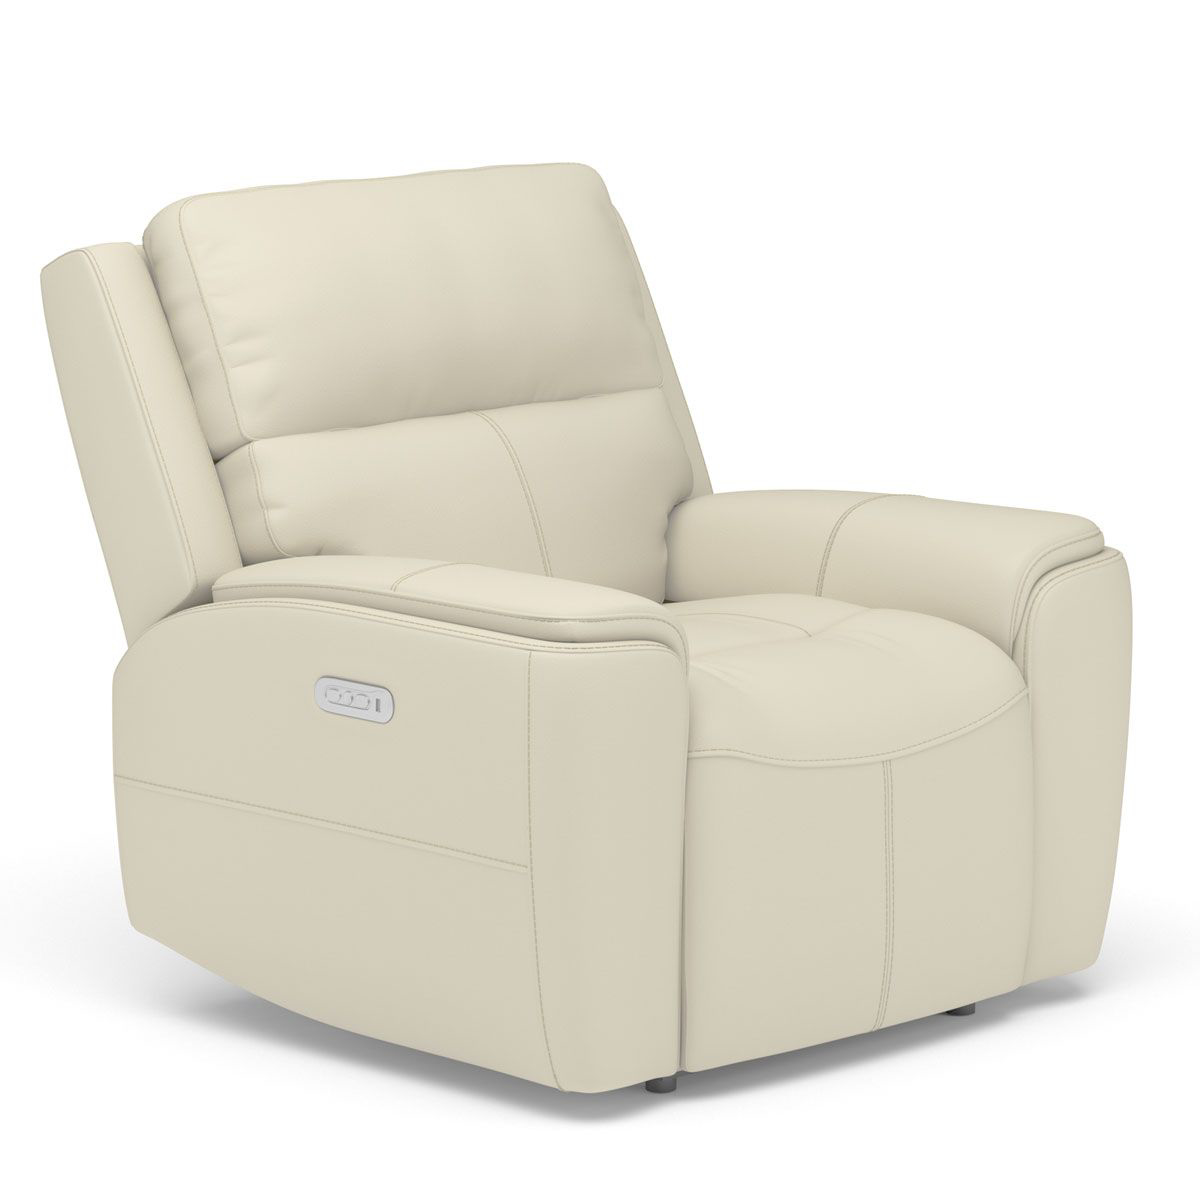 Picture of ELLIS PWR RECLINER W/PHR